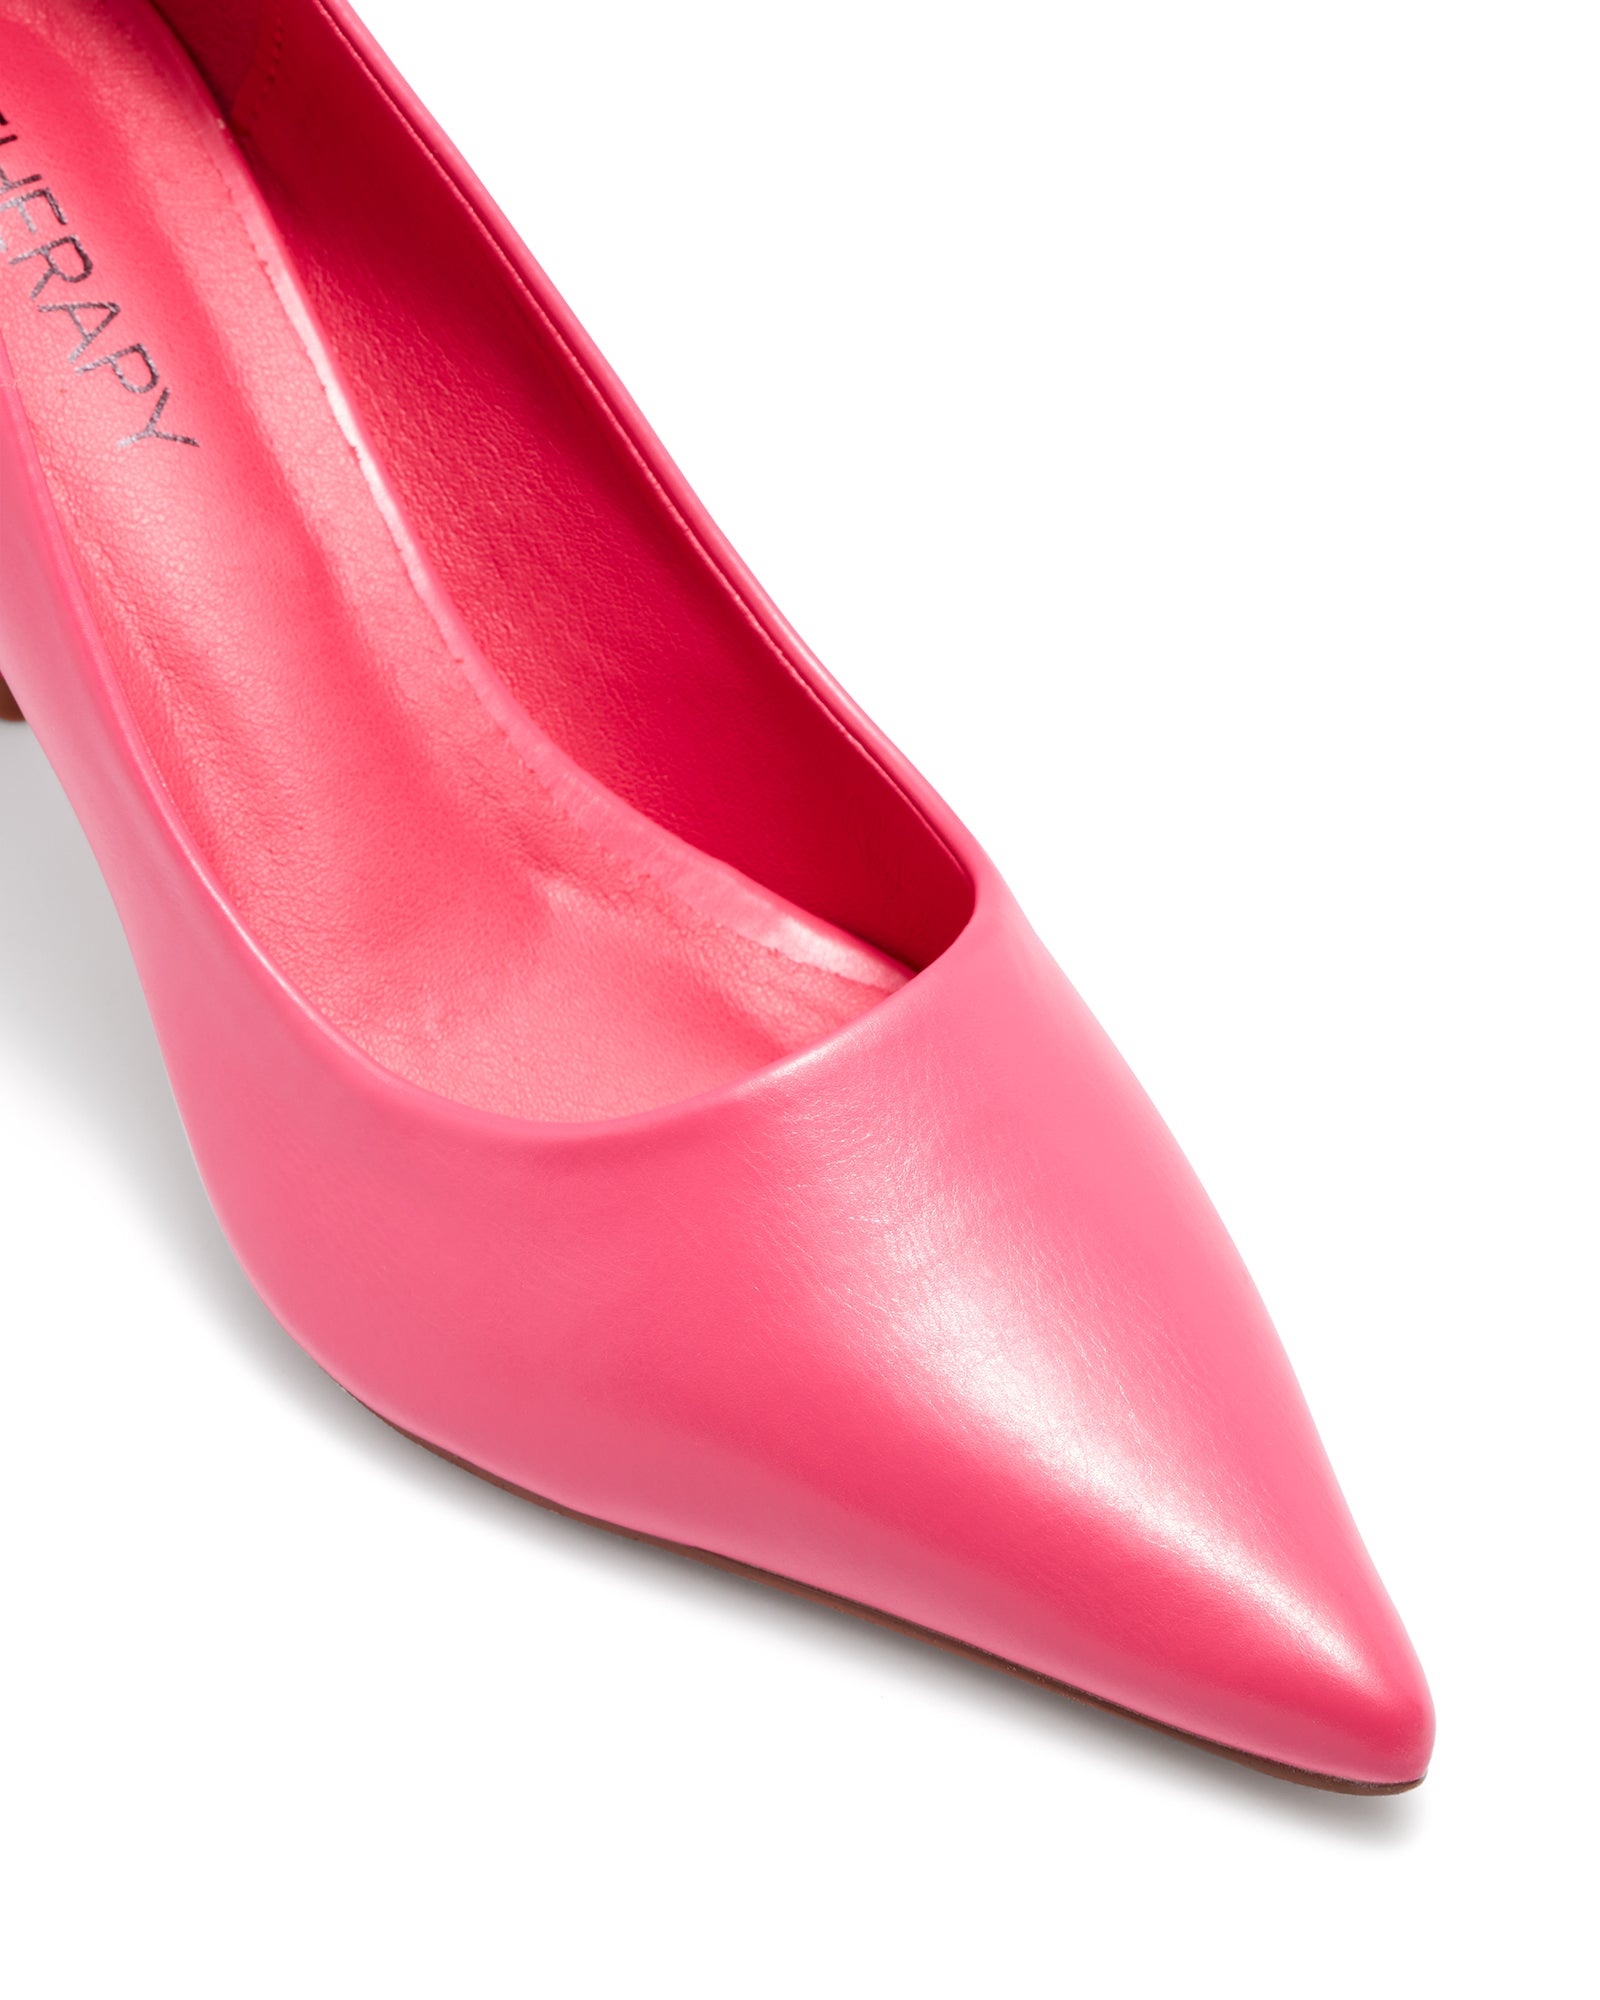 Therapy Shoes Sabrina Cabaret | Women's Heels | Pumps | Office 